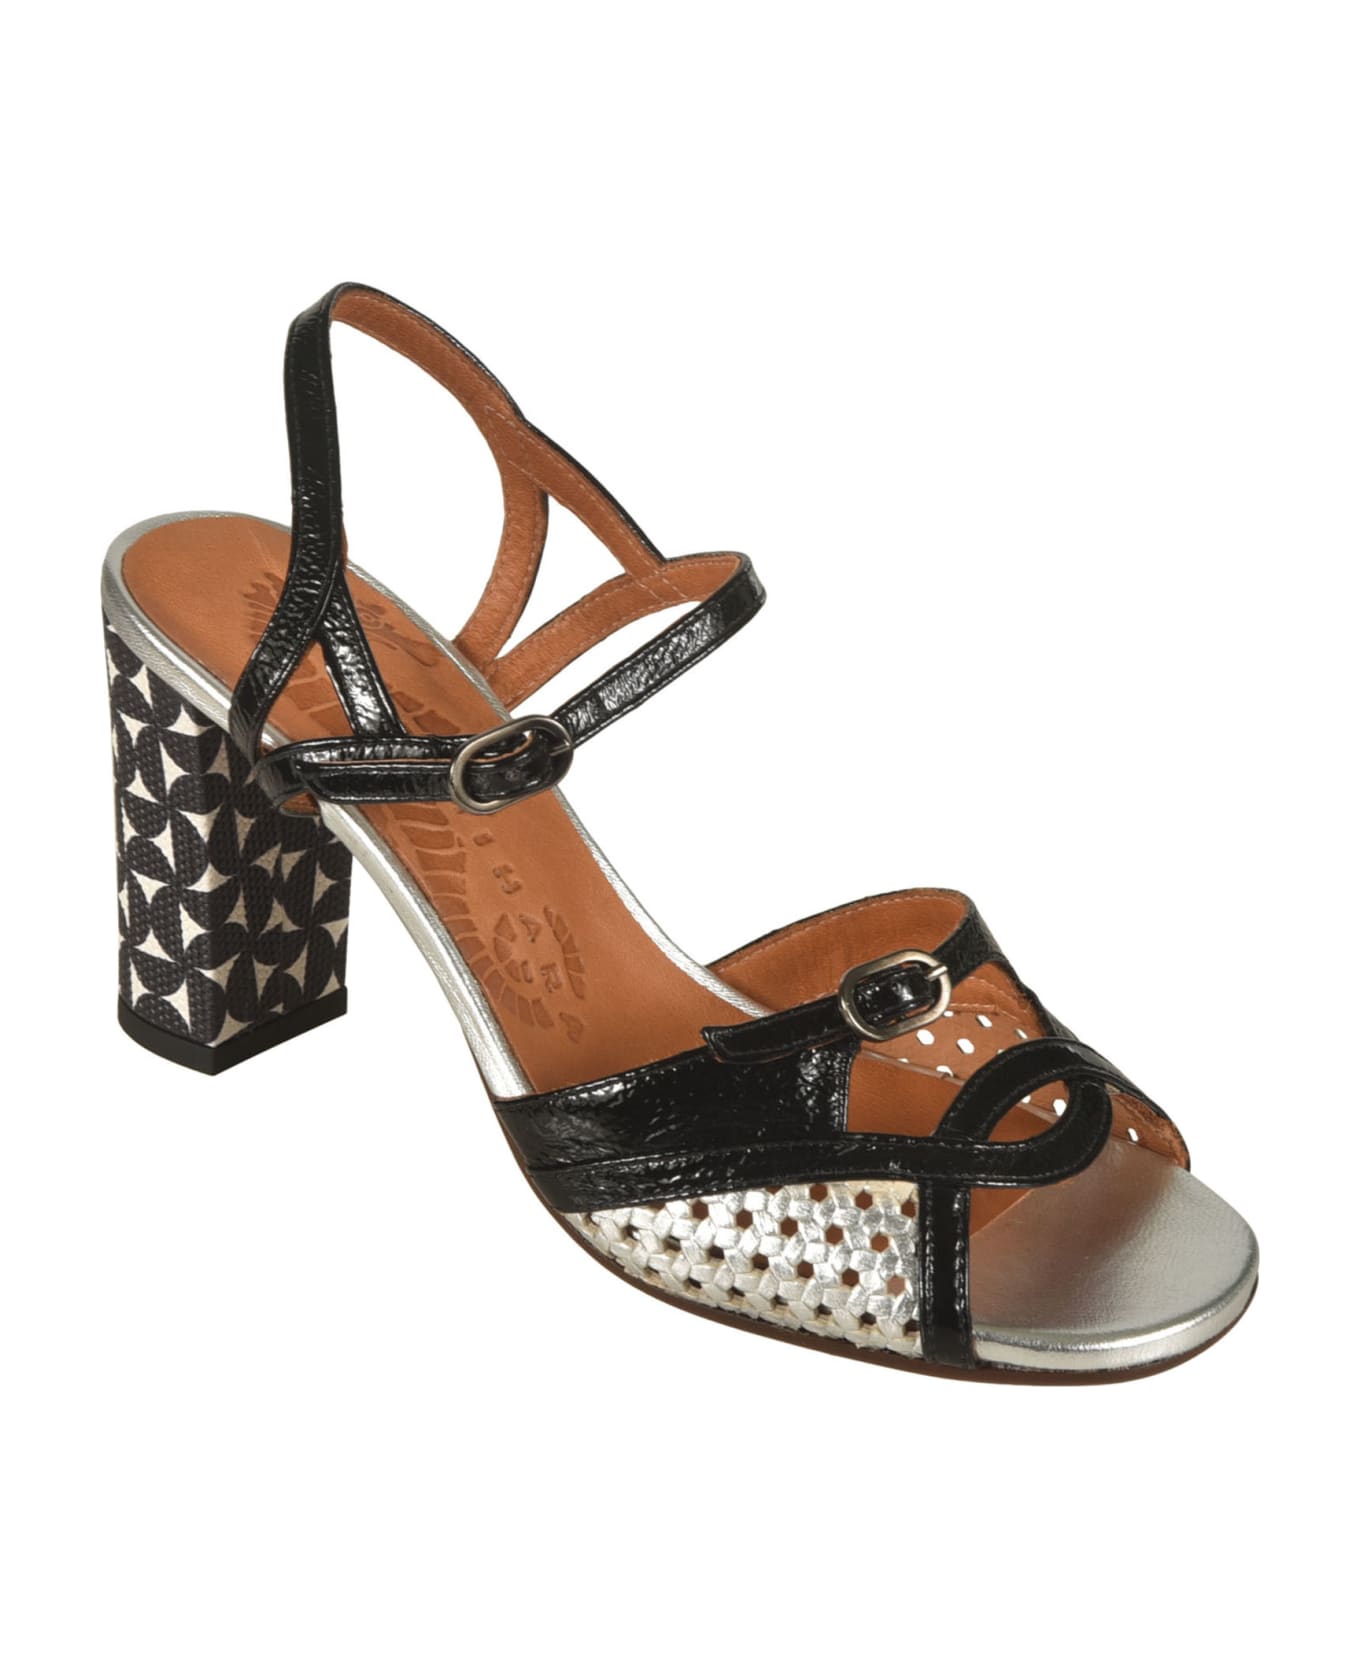 Chie Mihara Ankle Strap Sandals - Black